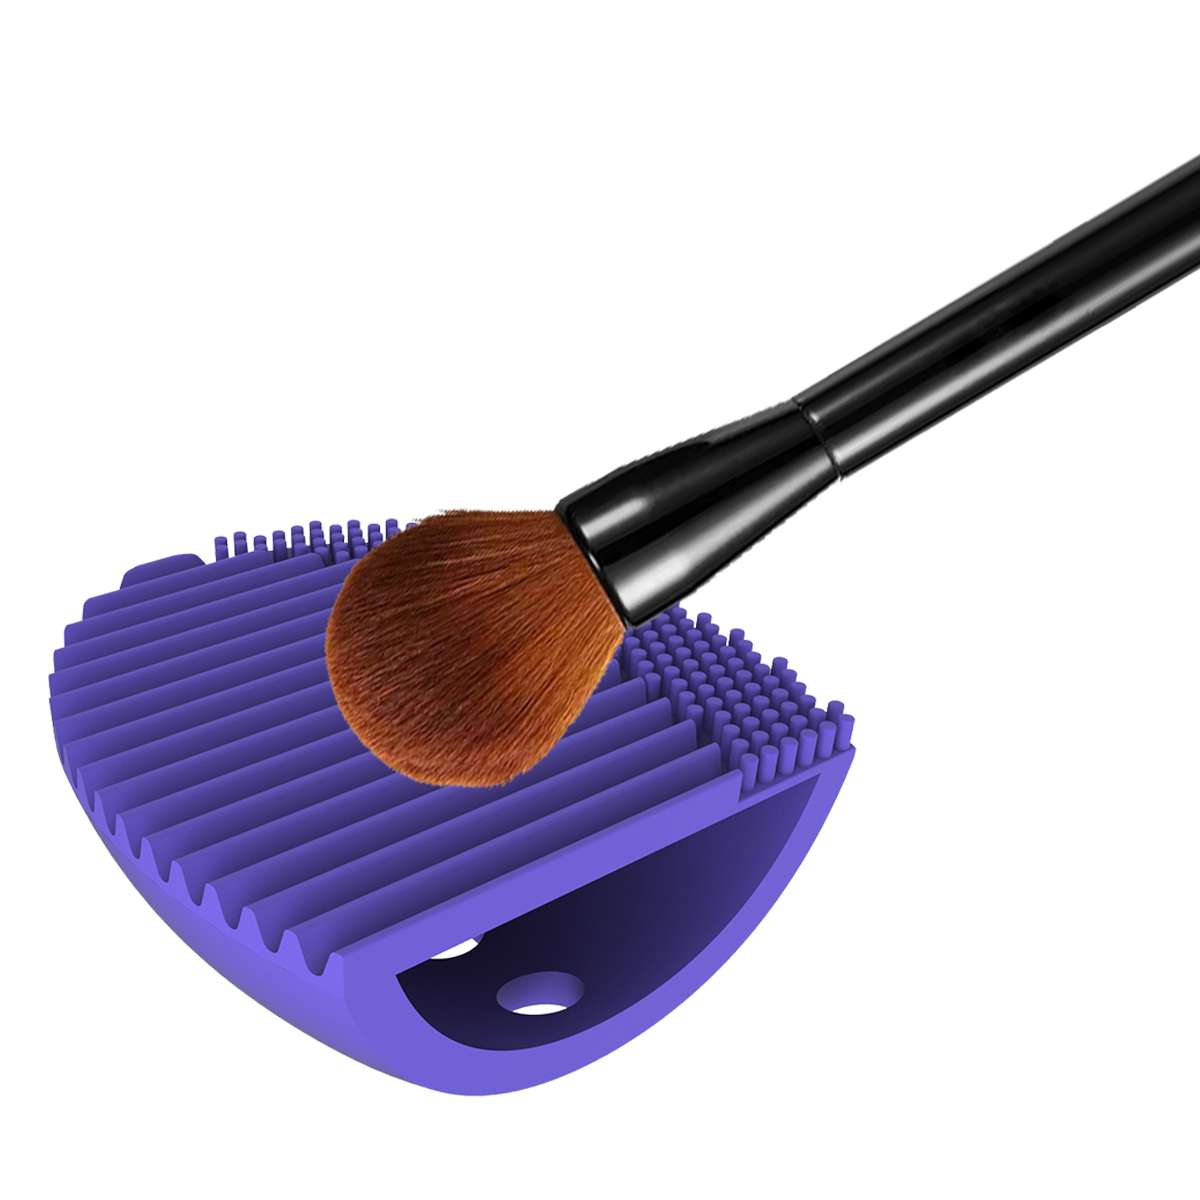 Make-up brush clean plate